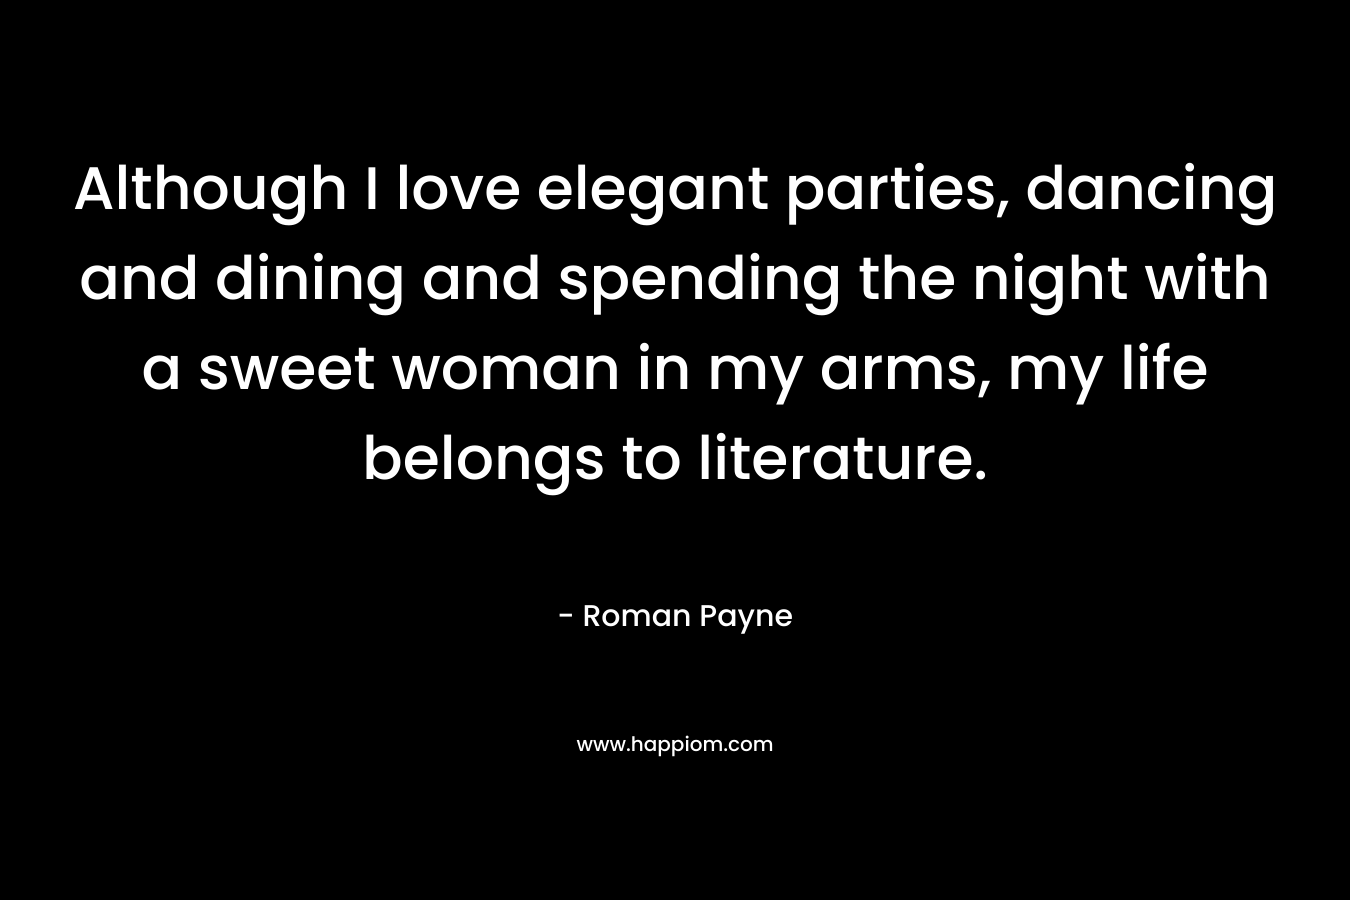 Although I love elegant parties, dancing and dining and spending the night with a sweet woman in my arms, my life belongs to literature.